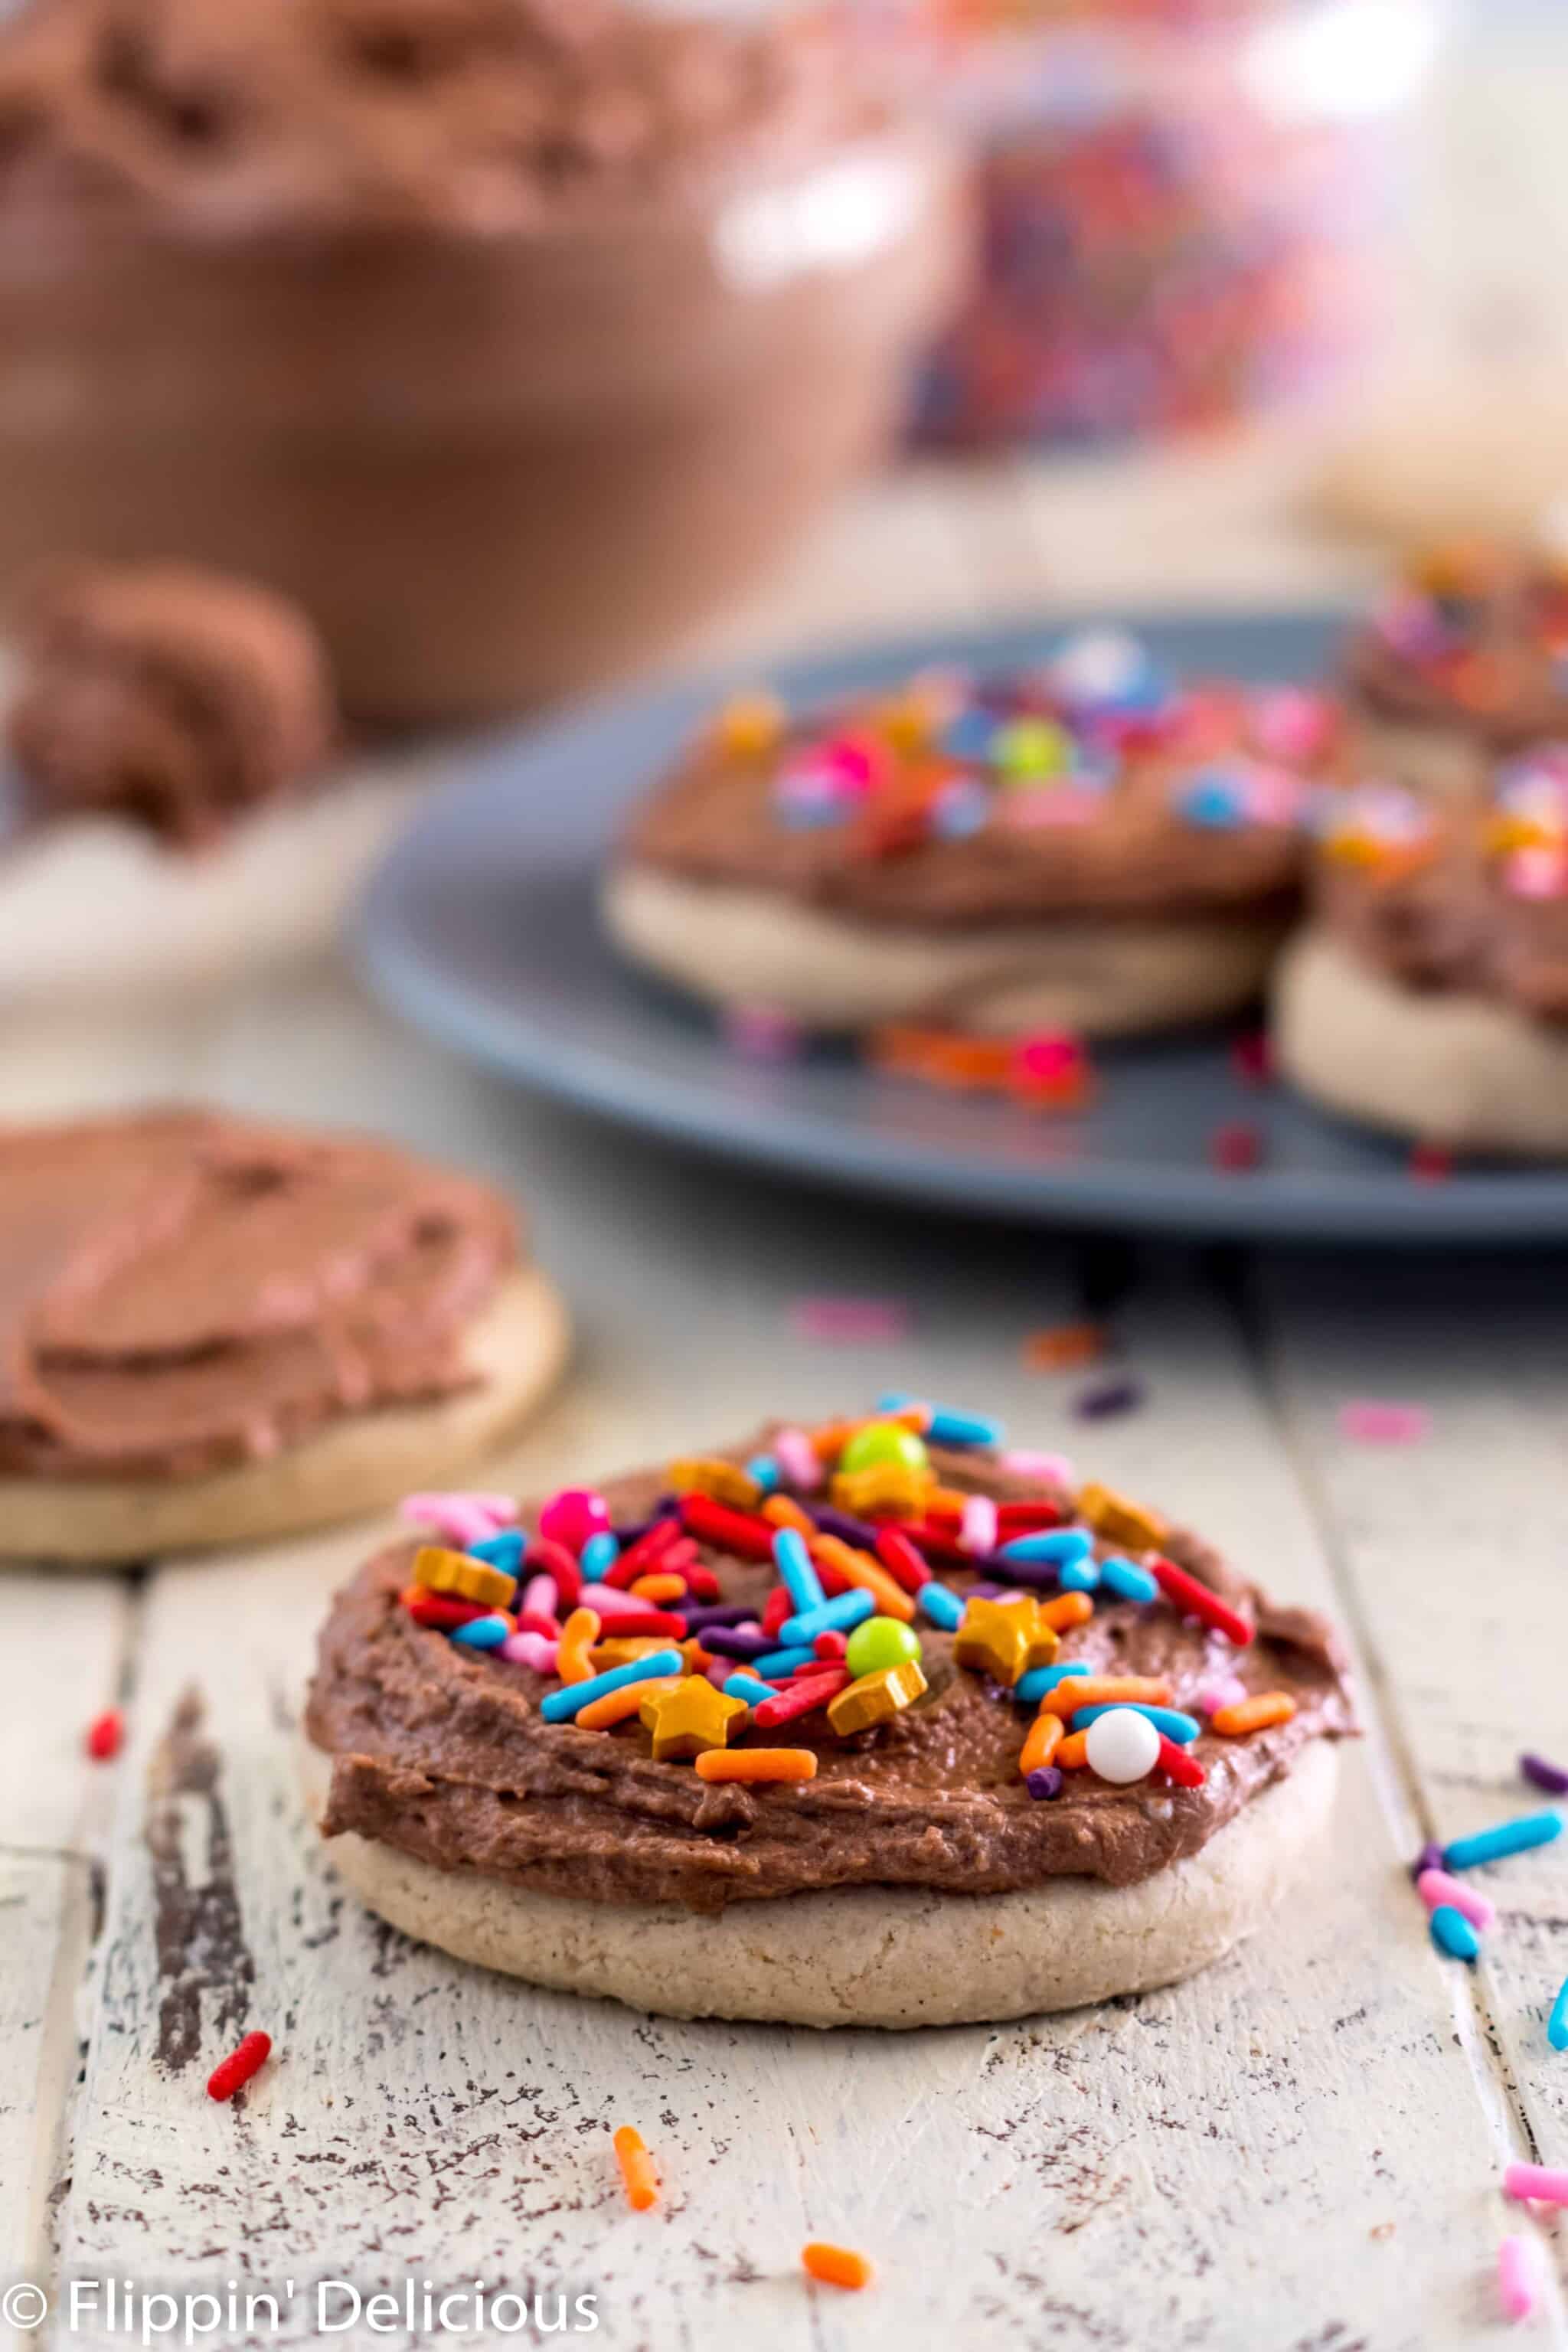 gluten free sugar cookies frosted with vegan chocolate buttercream sprinkled with rainbow jimmies and golden star sprinkles on a wooden table with a big glass bowl of chocolate vegan frosting and a plate of frosted and sprinkled gluten free sugar cookies in the background